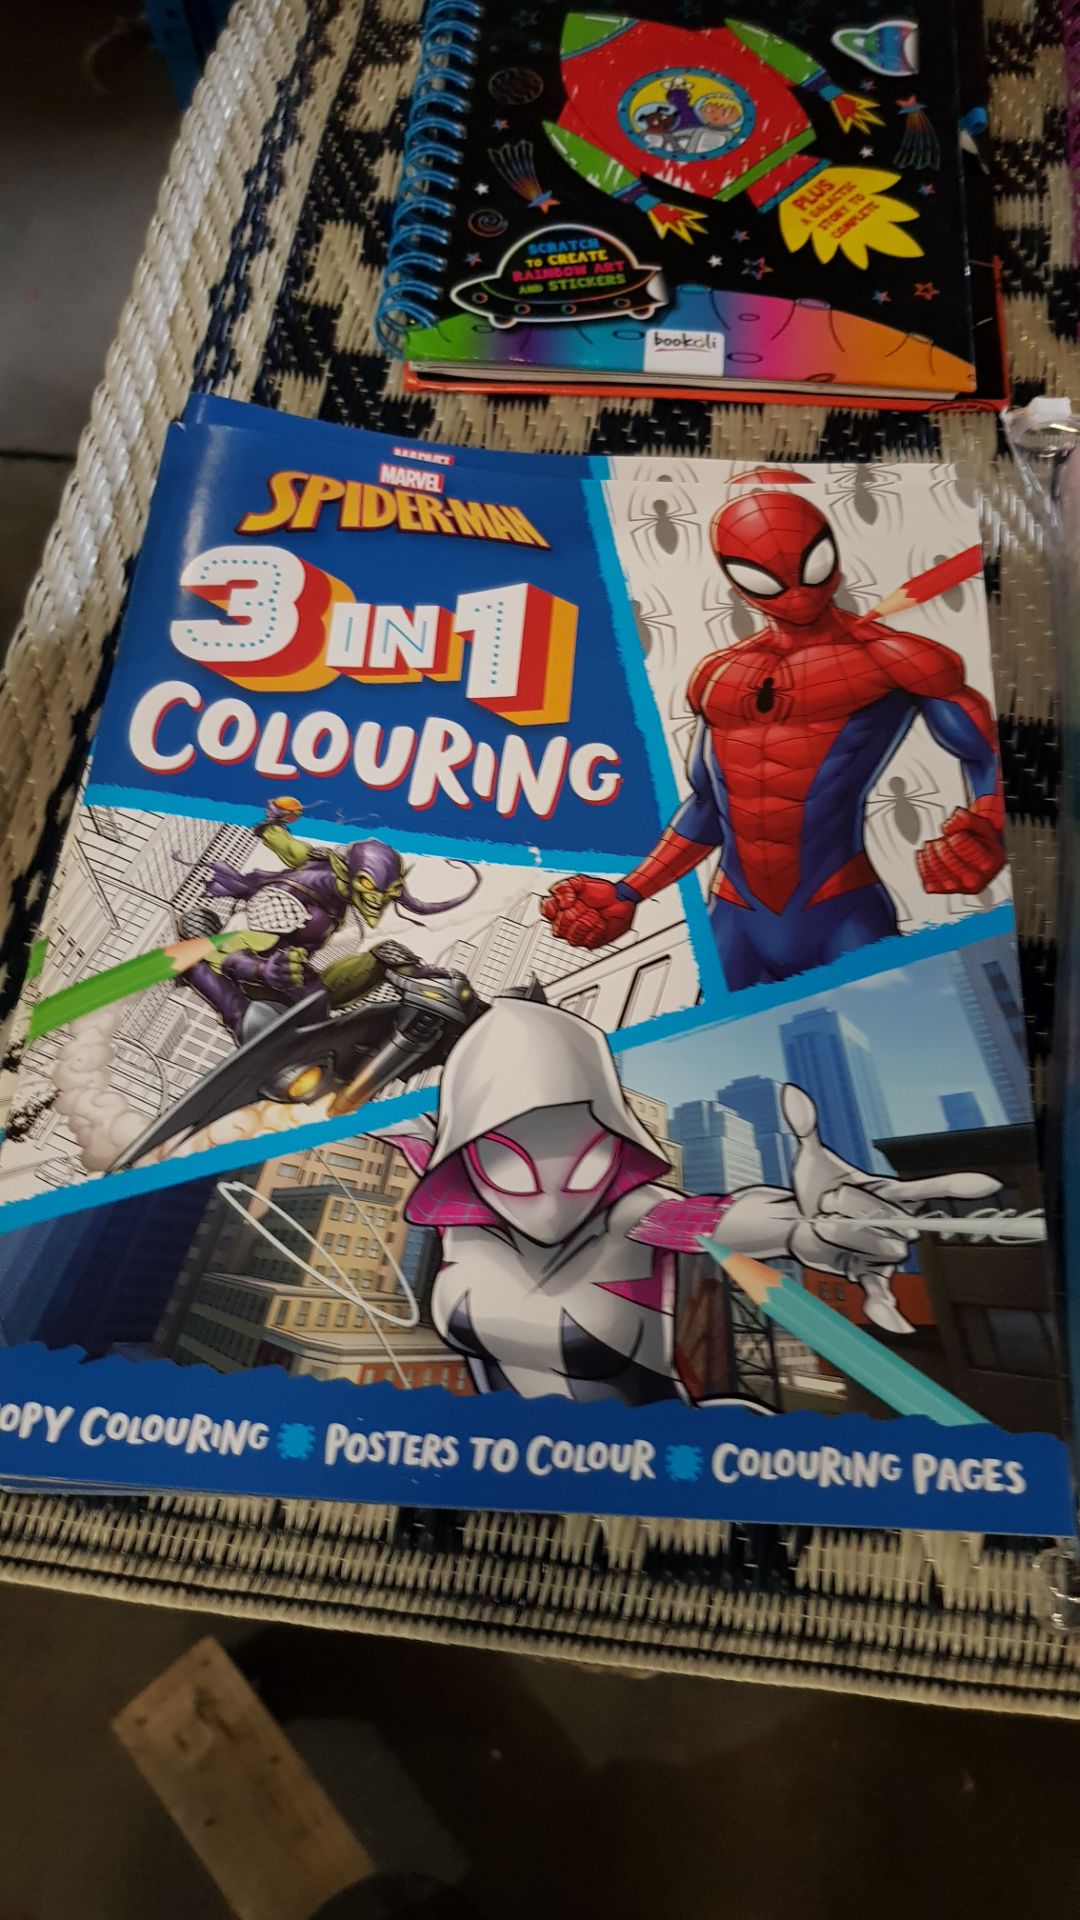 Description: (70/1E) Lot RRP £100 79 17x Marvel Spiderman 3 In 1 Colouring RRP £3 99 Each 1x - Image 8 of 13